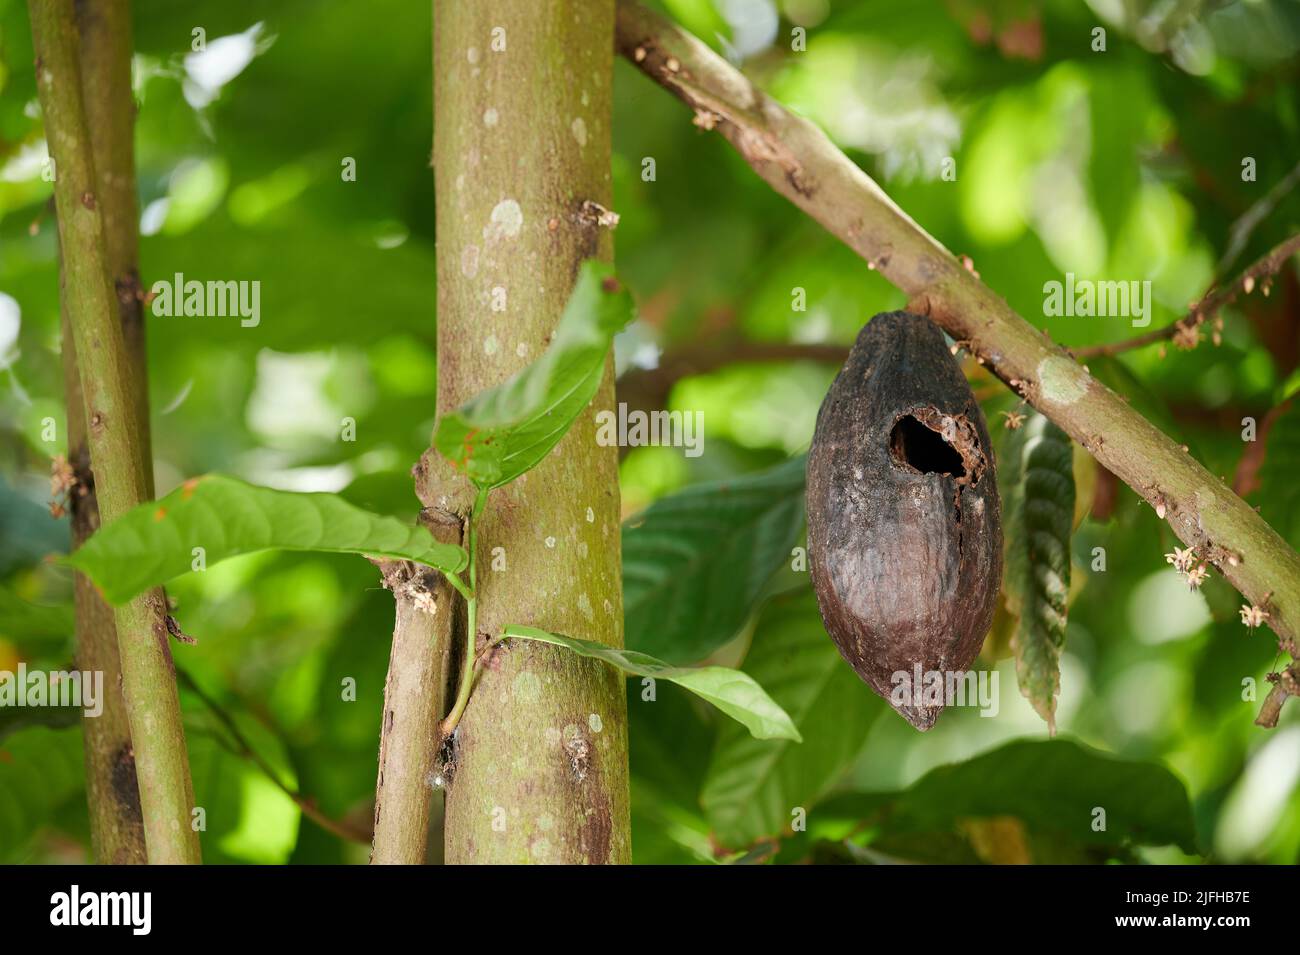 Chocolate cacao plant disease on blurred green background Stock Photo